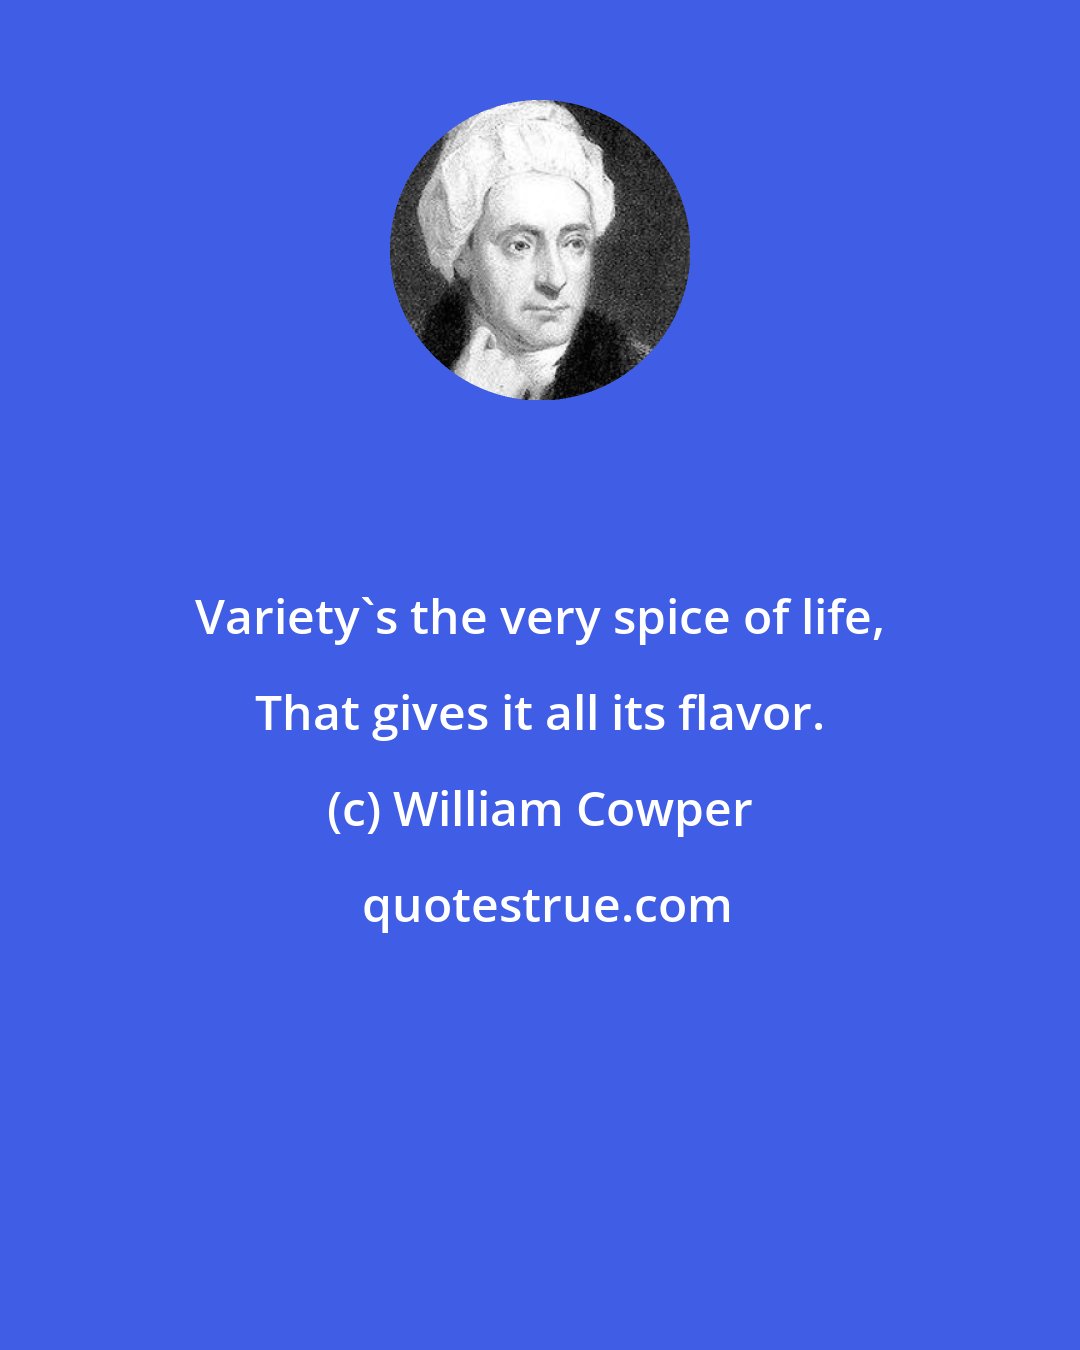 William Cowper: Variety's the very spice of life, That gives it all its flavor.